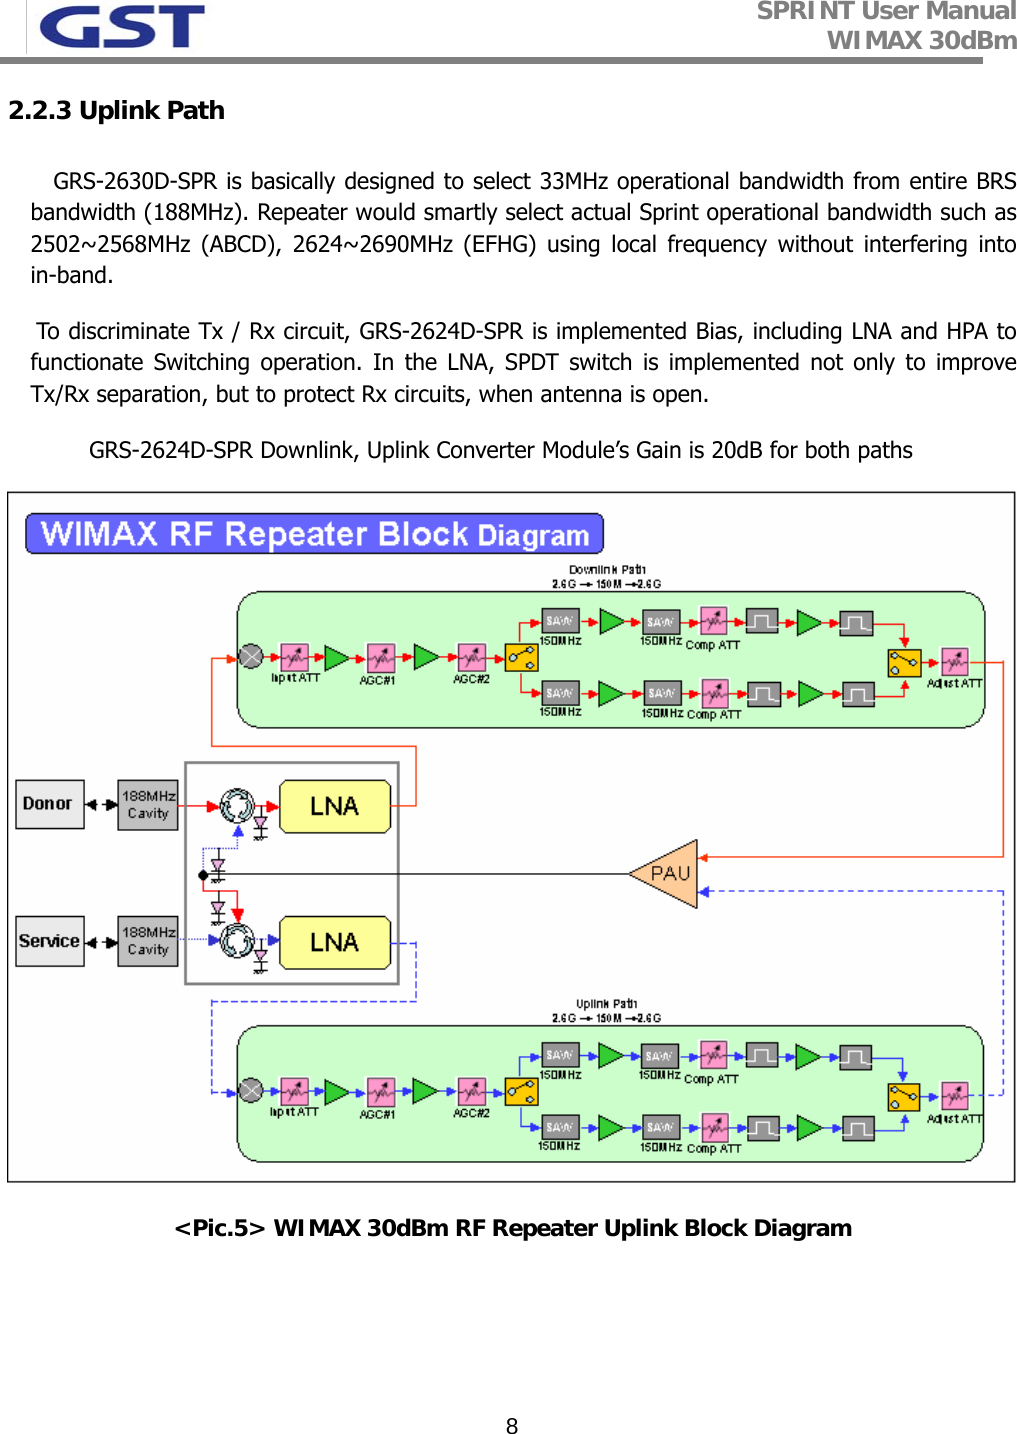 SPRINT User Manual WIMAX 30dBm   82.2.3 Uplink Path GRS-2630D-SPR is basically designed to select 33MHz operational bandwidth from entire BRS bandwidth (188MHz). Repeater would smartly select actual Sprint operational bandwidth such as 2502~2568MHz (ABCD), 2624~2690MHz (EFHG) using local frequency without interfering into in-band.     To discriminate Tx / Rx circuit, GRS-2624D-SPR is implemented Bias, including LNA and HPA to functionate Switching operation. In the LNA, SPDT switch is implemented not only to improve Tx/Rx separation, but to protect Rx circuits, when antenna is open.       GRS-2624D-SPR Downlink, Uplink Converter Module’s Gain is 20dB for both paths  &lt;Pic.5&gt; WIMAX 30dBm RF Repeater Uplink Block Diagram   